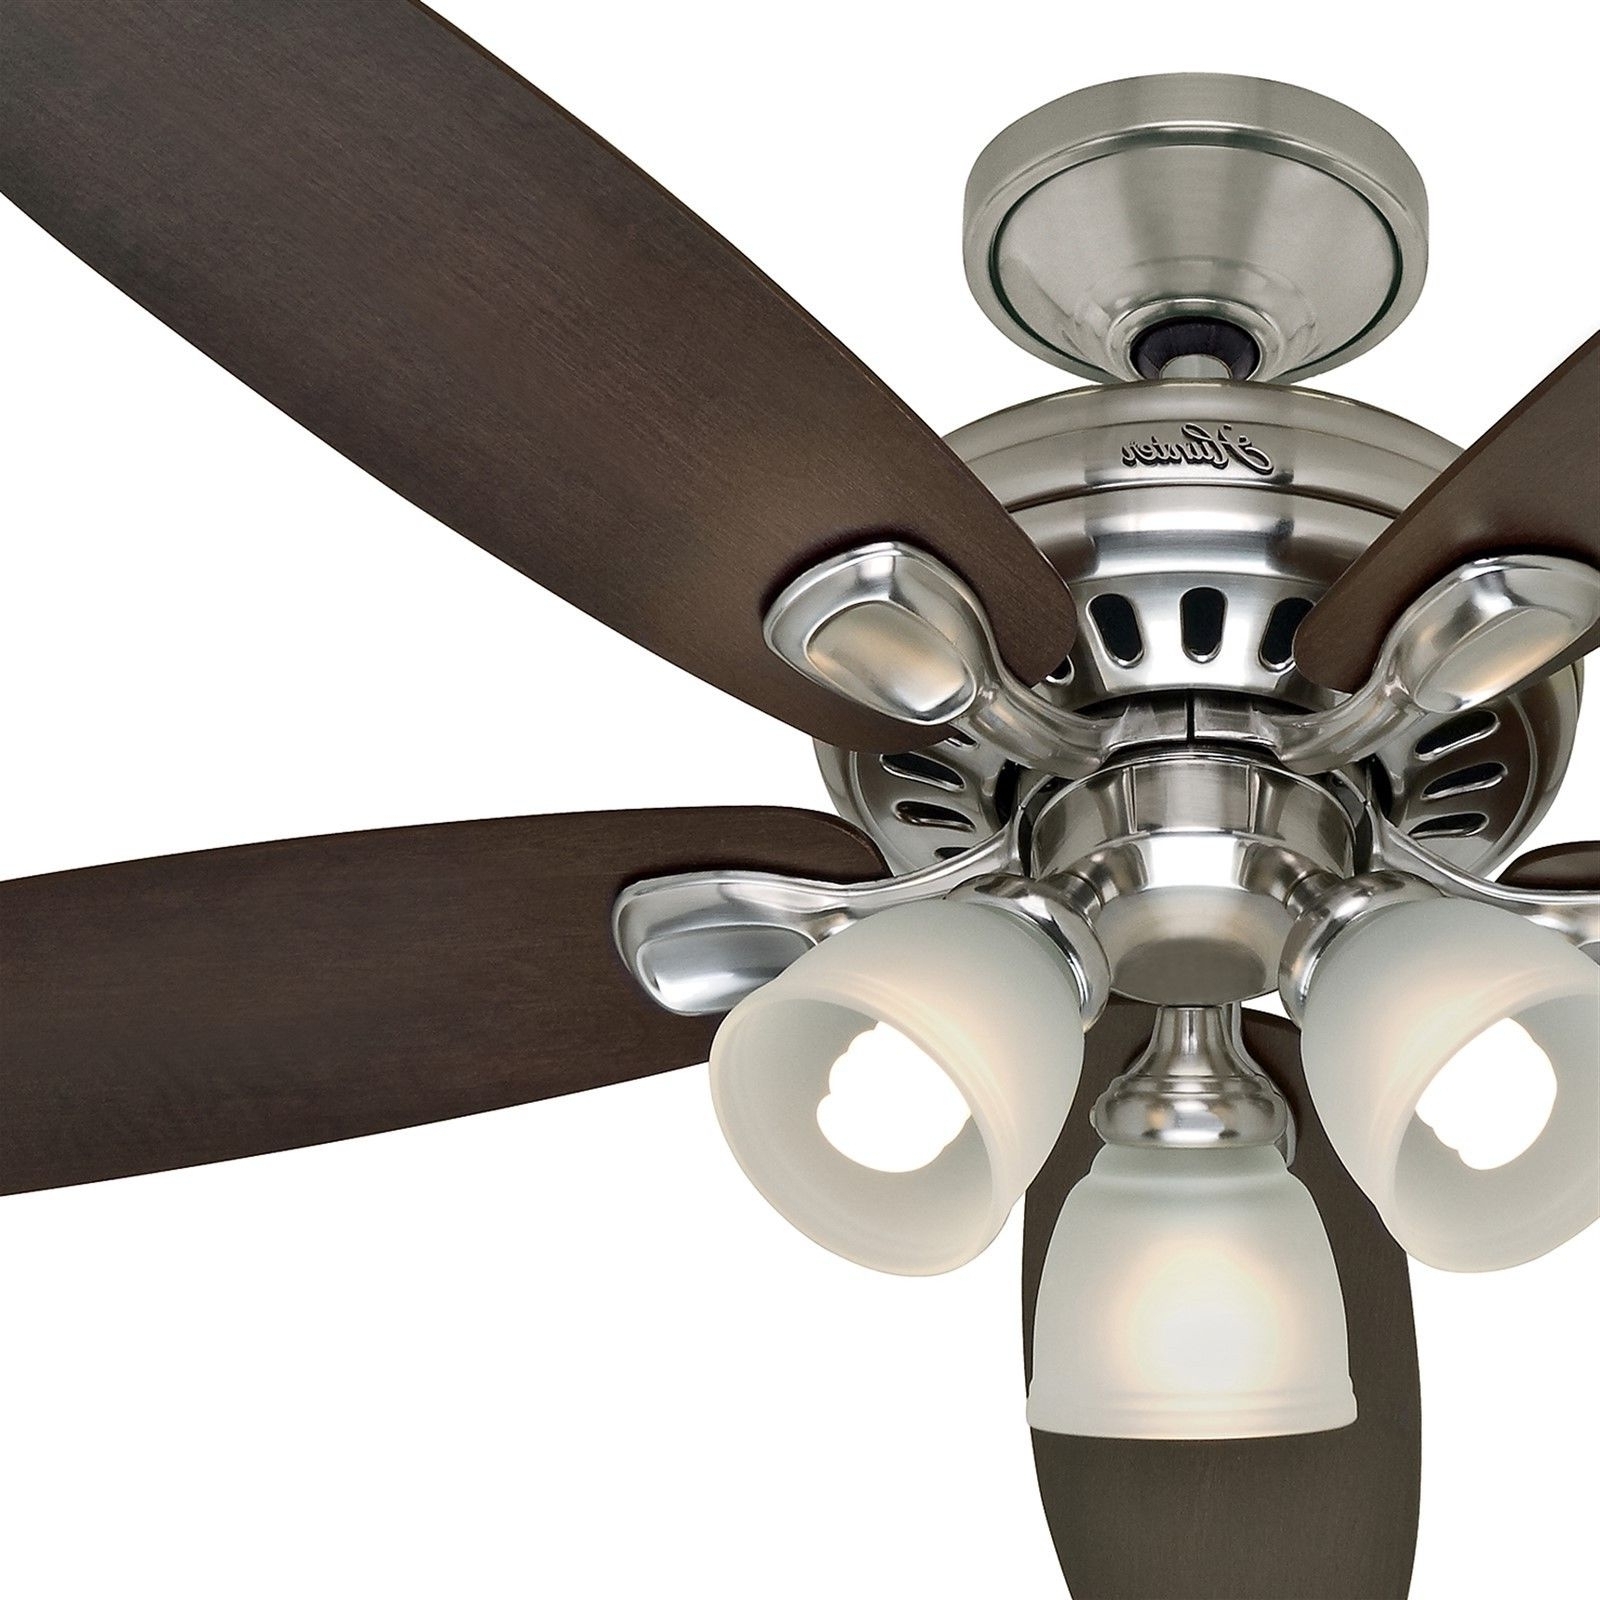 Permalink to Hunter Ceiling Fan And Light Control 27183